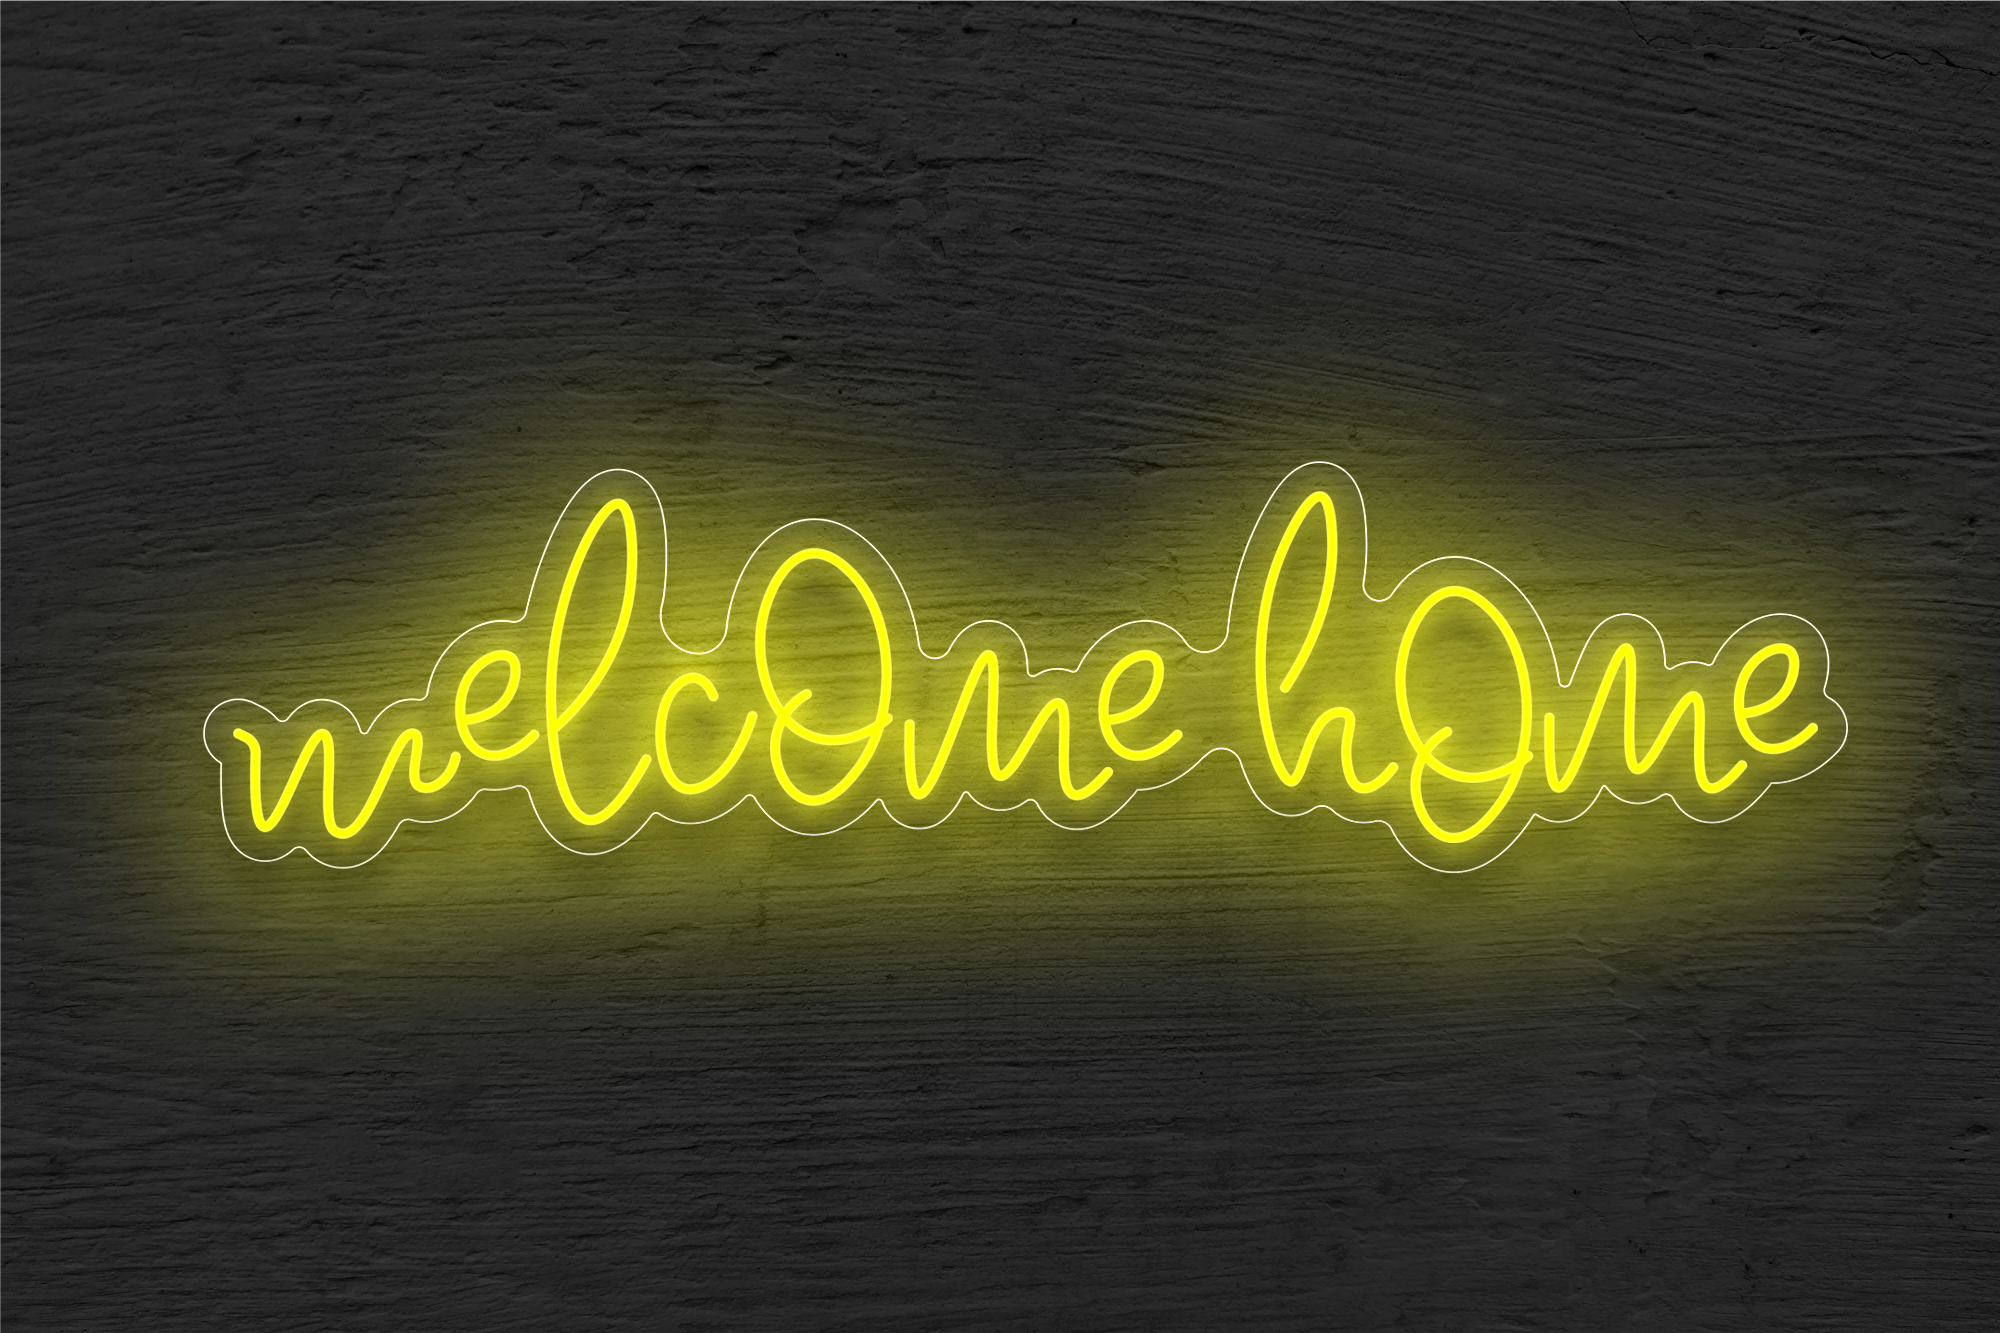 "Welcome Home" LED Neon Sign